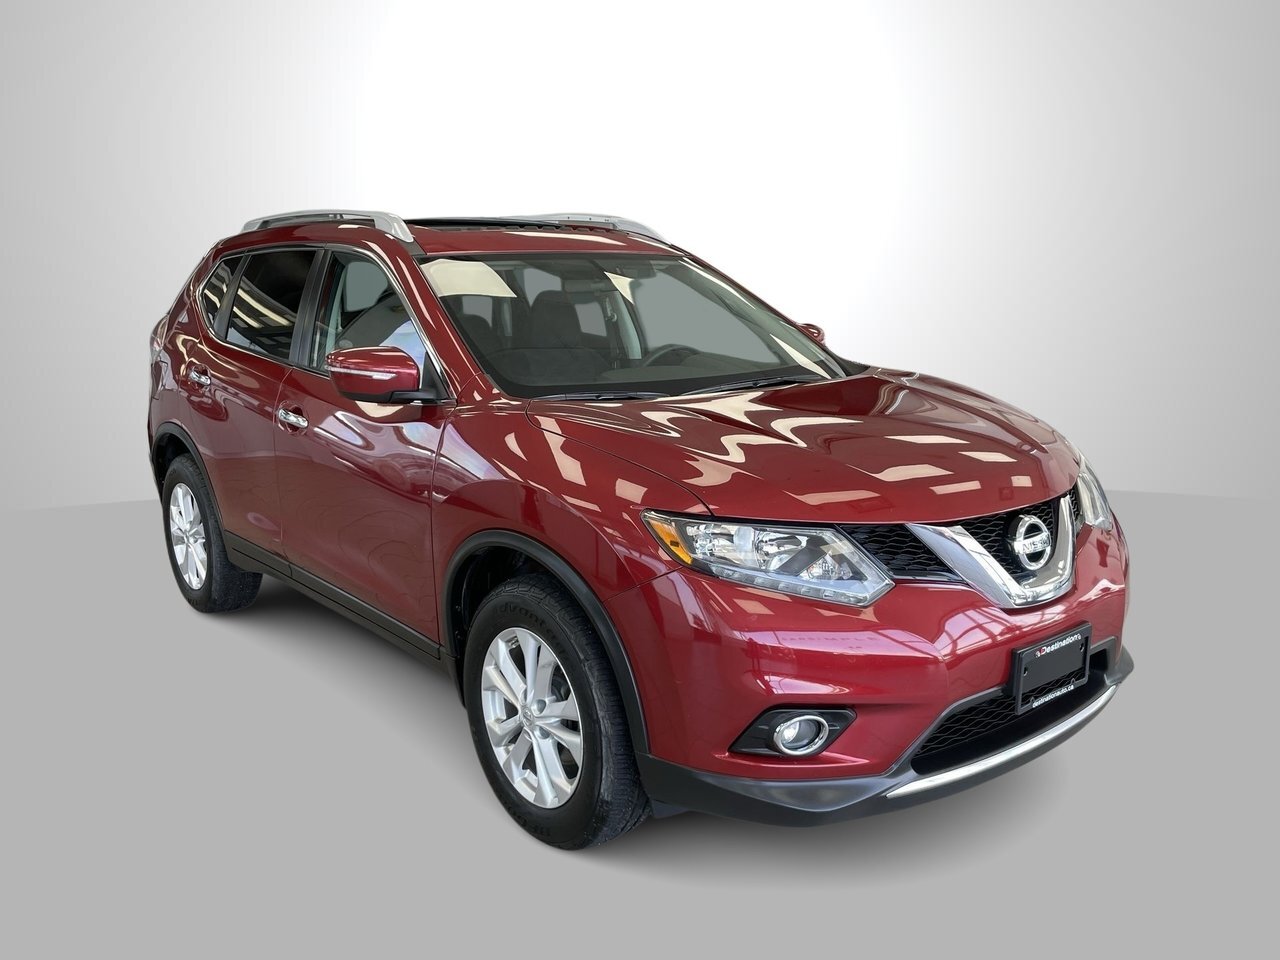 2015 Nissan Rogue SV | Great Price | Power Seat | Pano-Sunroof!